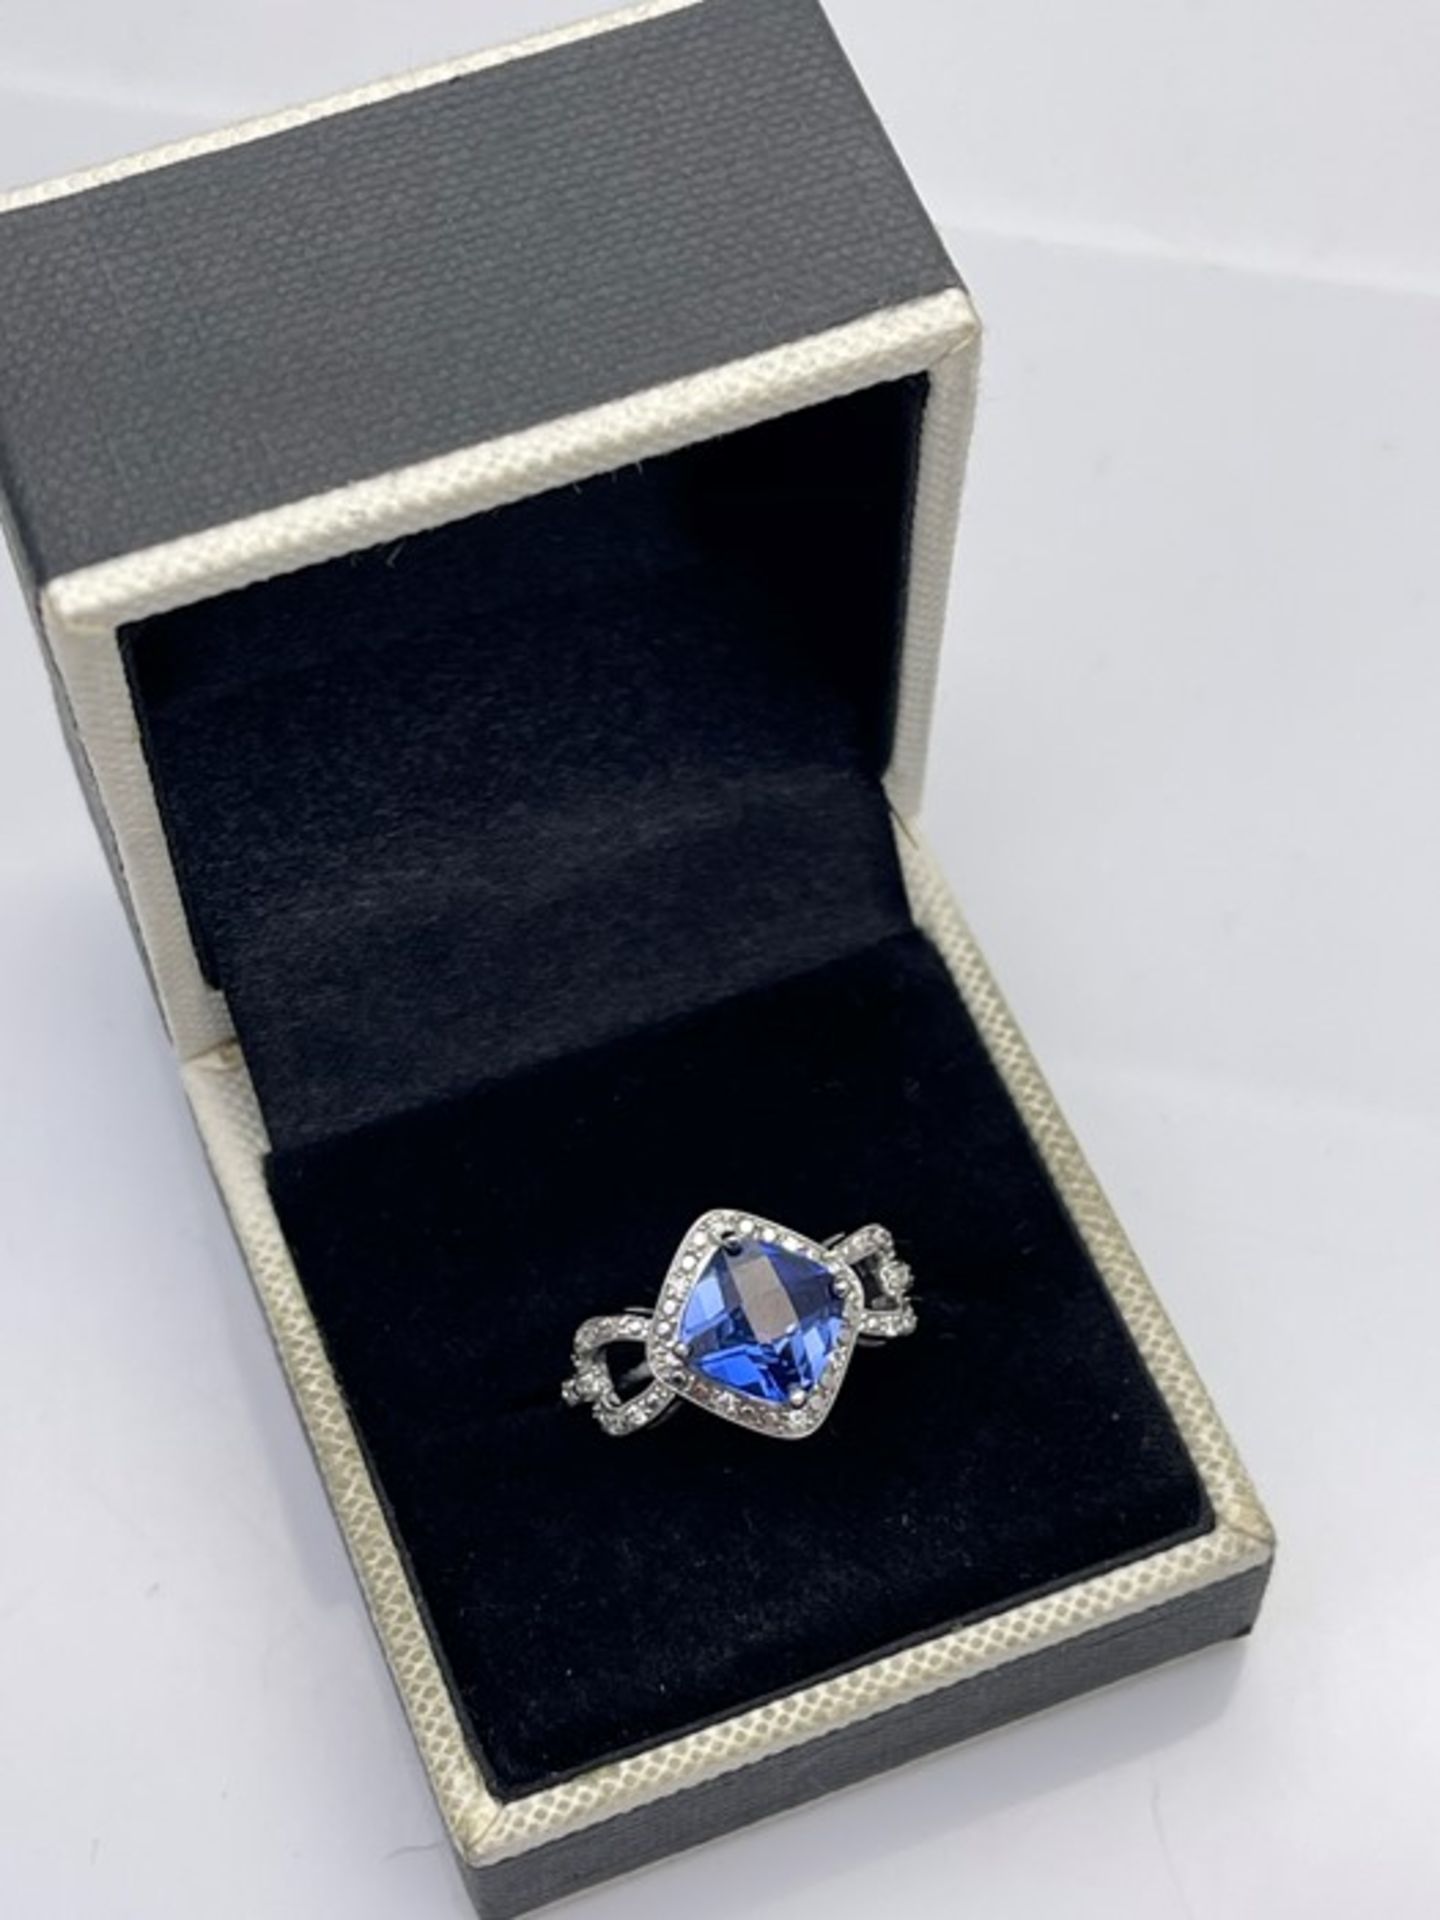 ***£2327.98*** 9CT WHITE GOLD LADIES DIAMOND RING SET WITH A BLUE CENTER STONE, D, VS QUALITY,